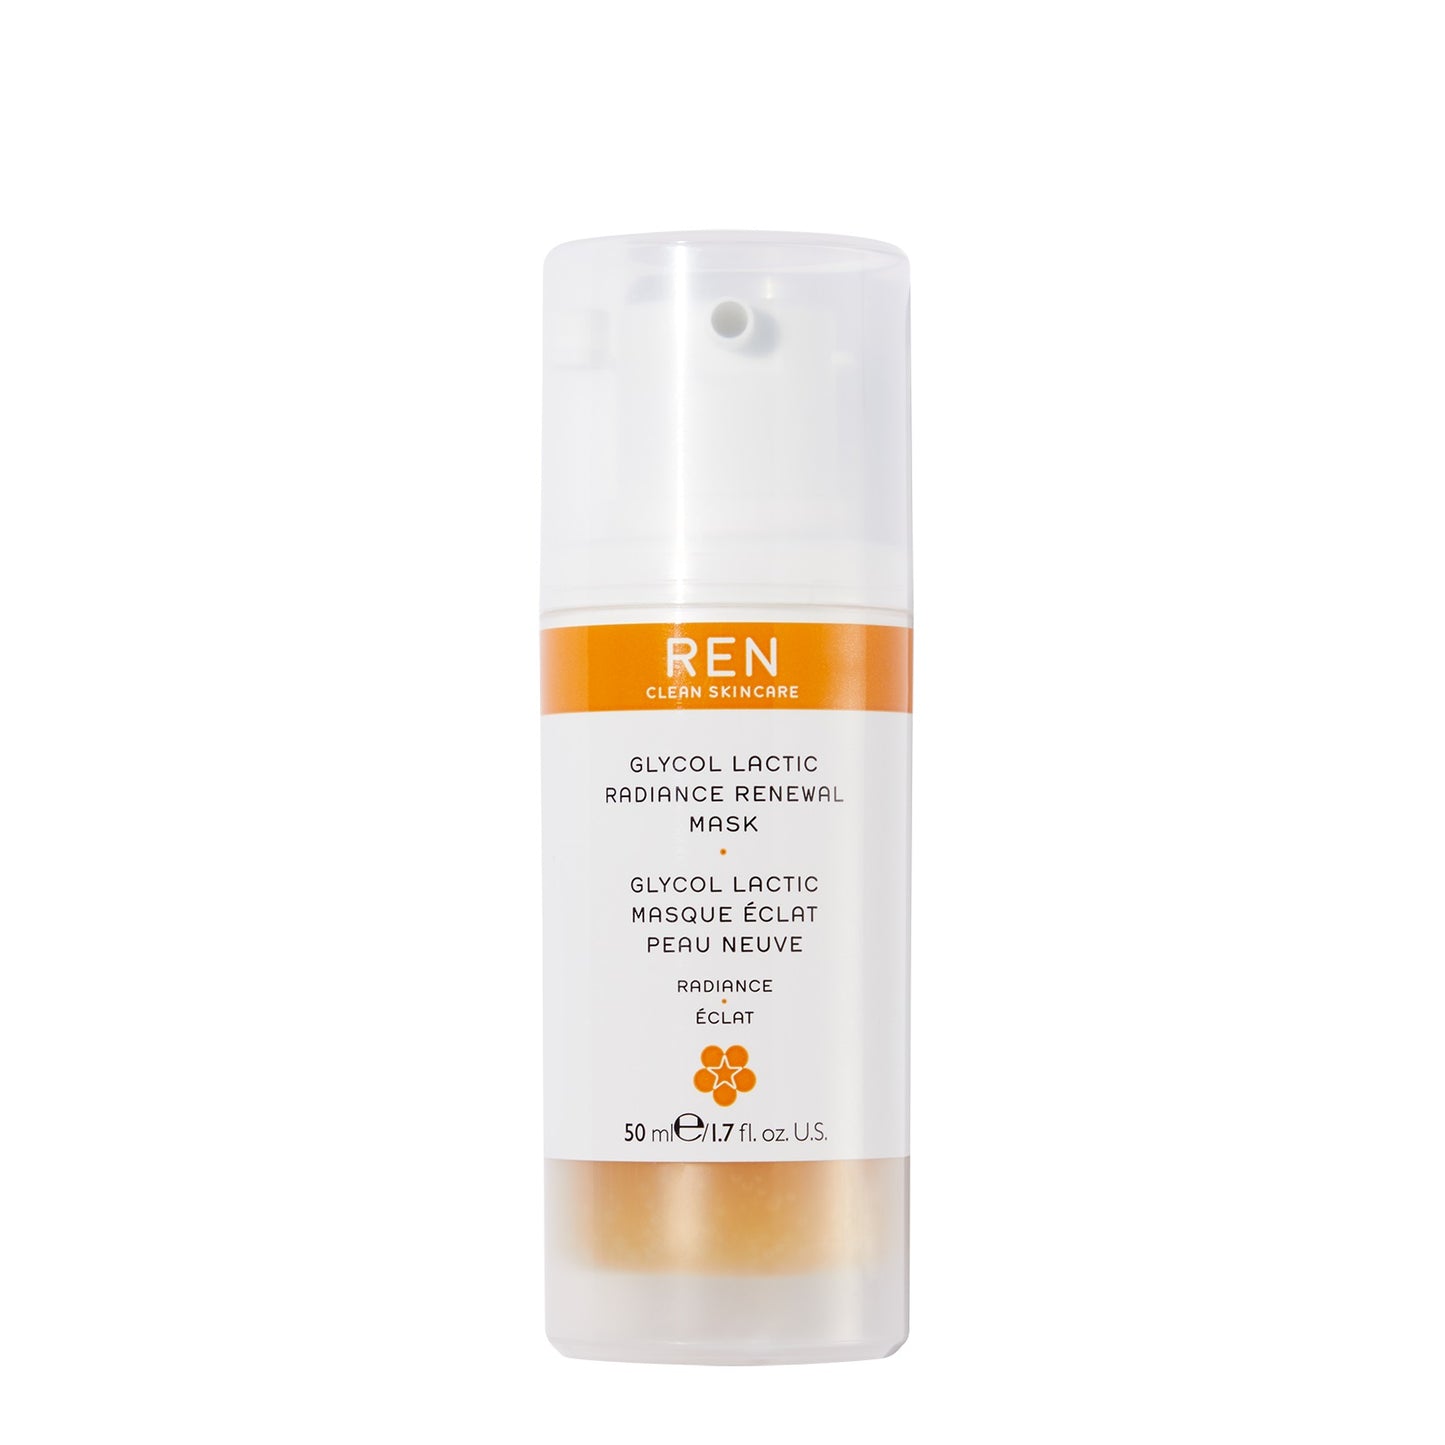 REN CLEAN SKINCARE RADIANCE GLYCOL LACTIC MASK